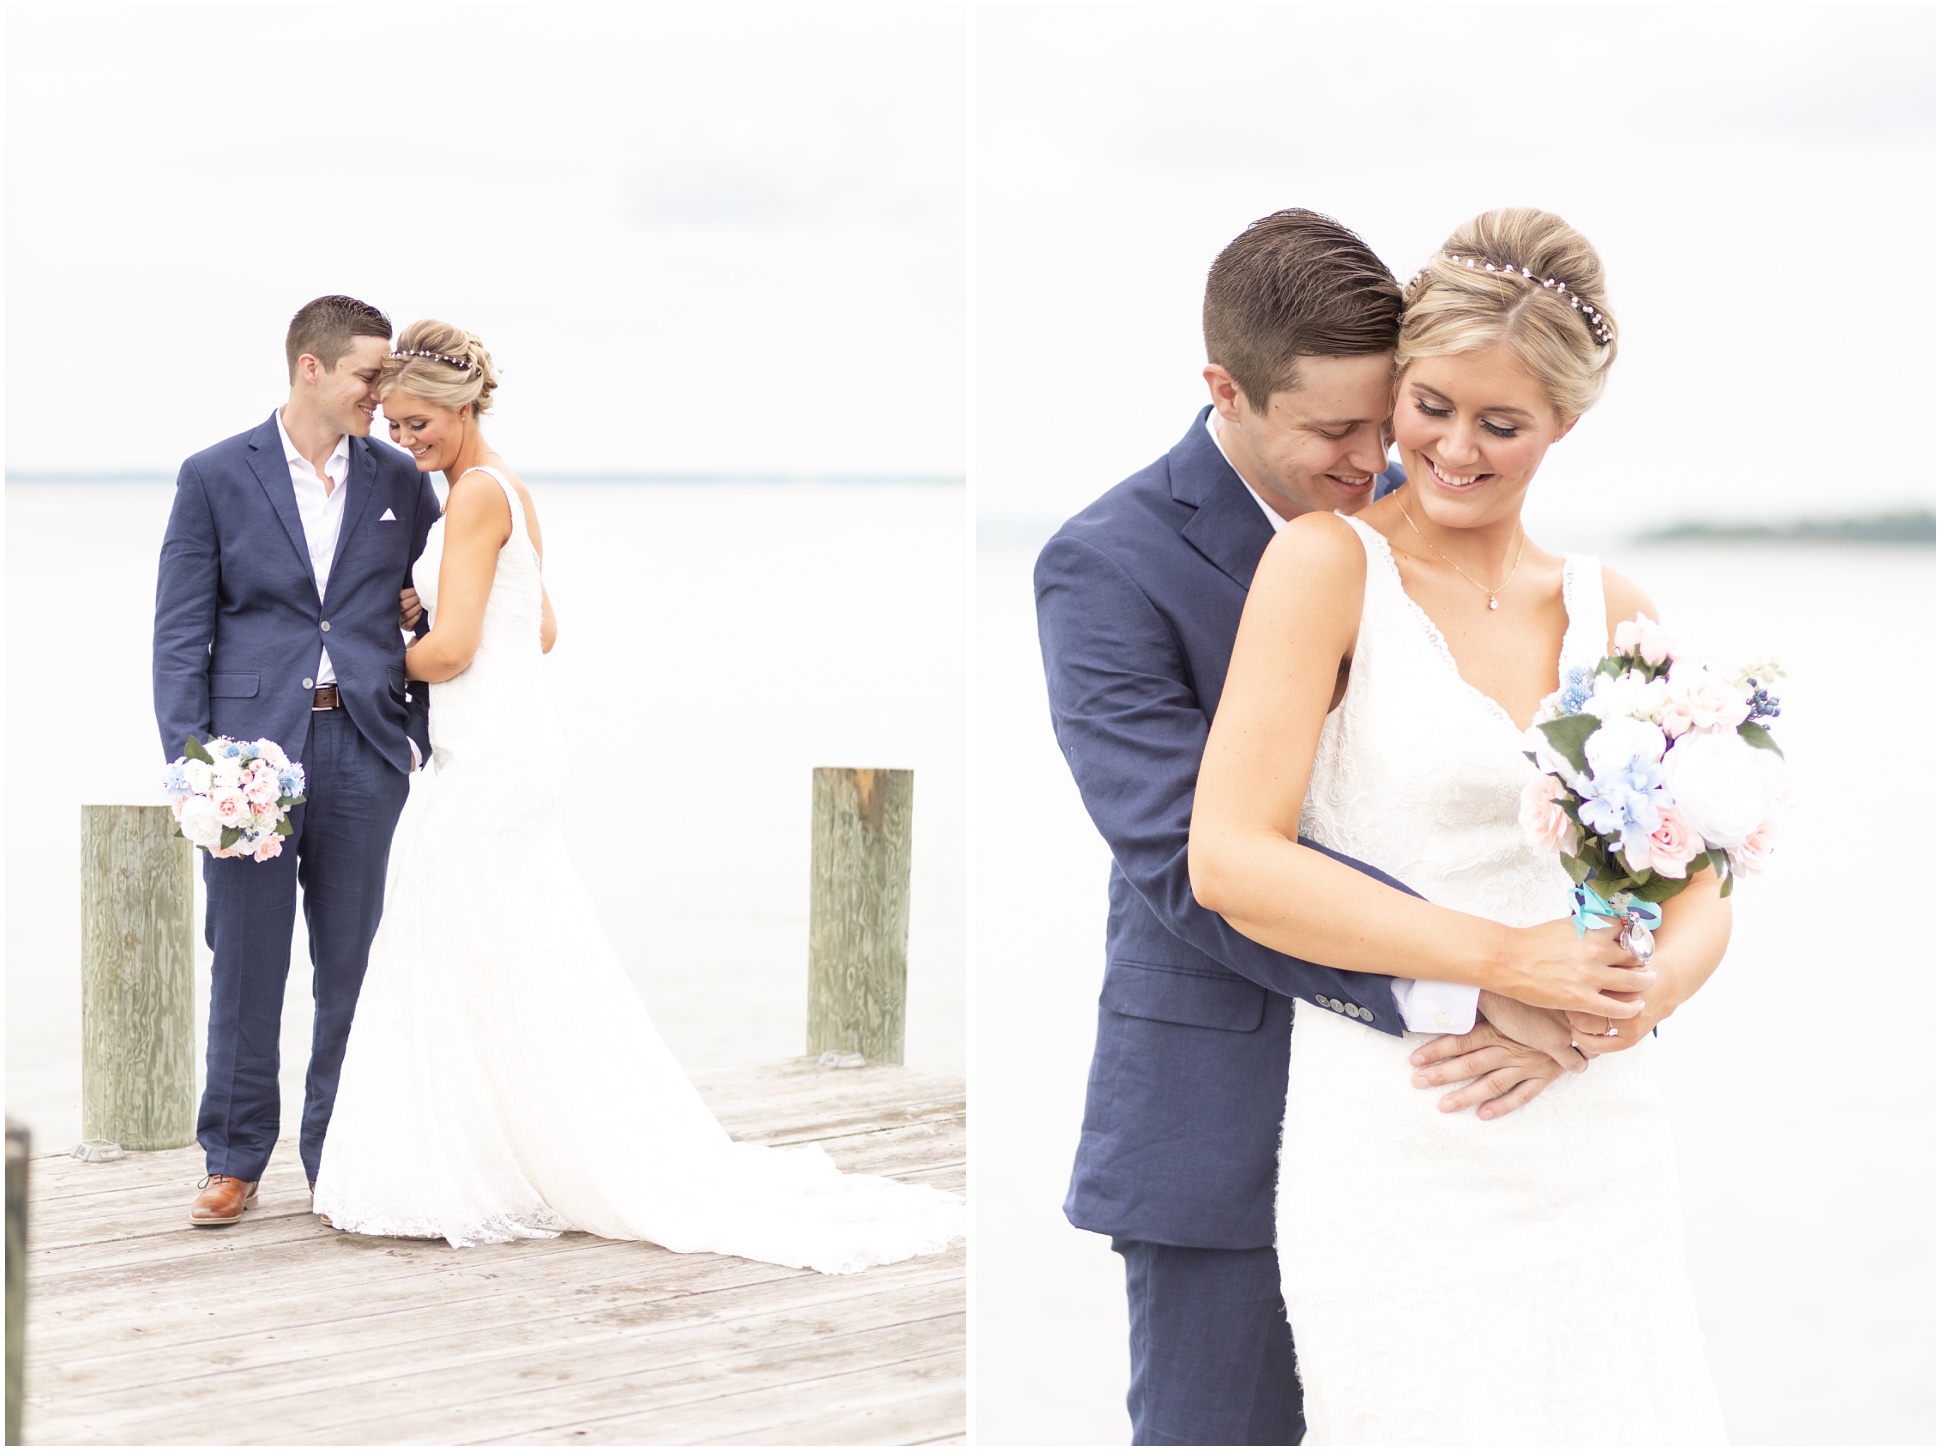 Two images of the bride and groom on the dock by the water